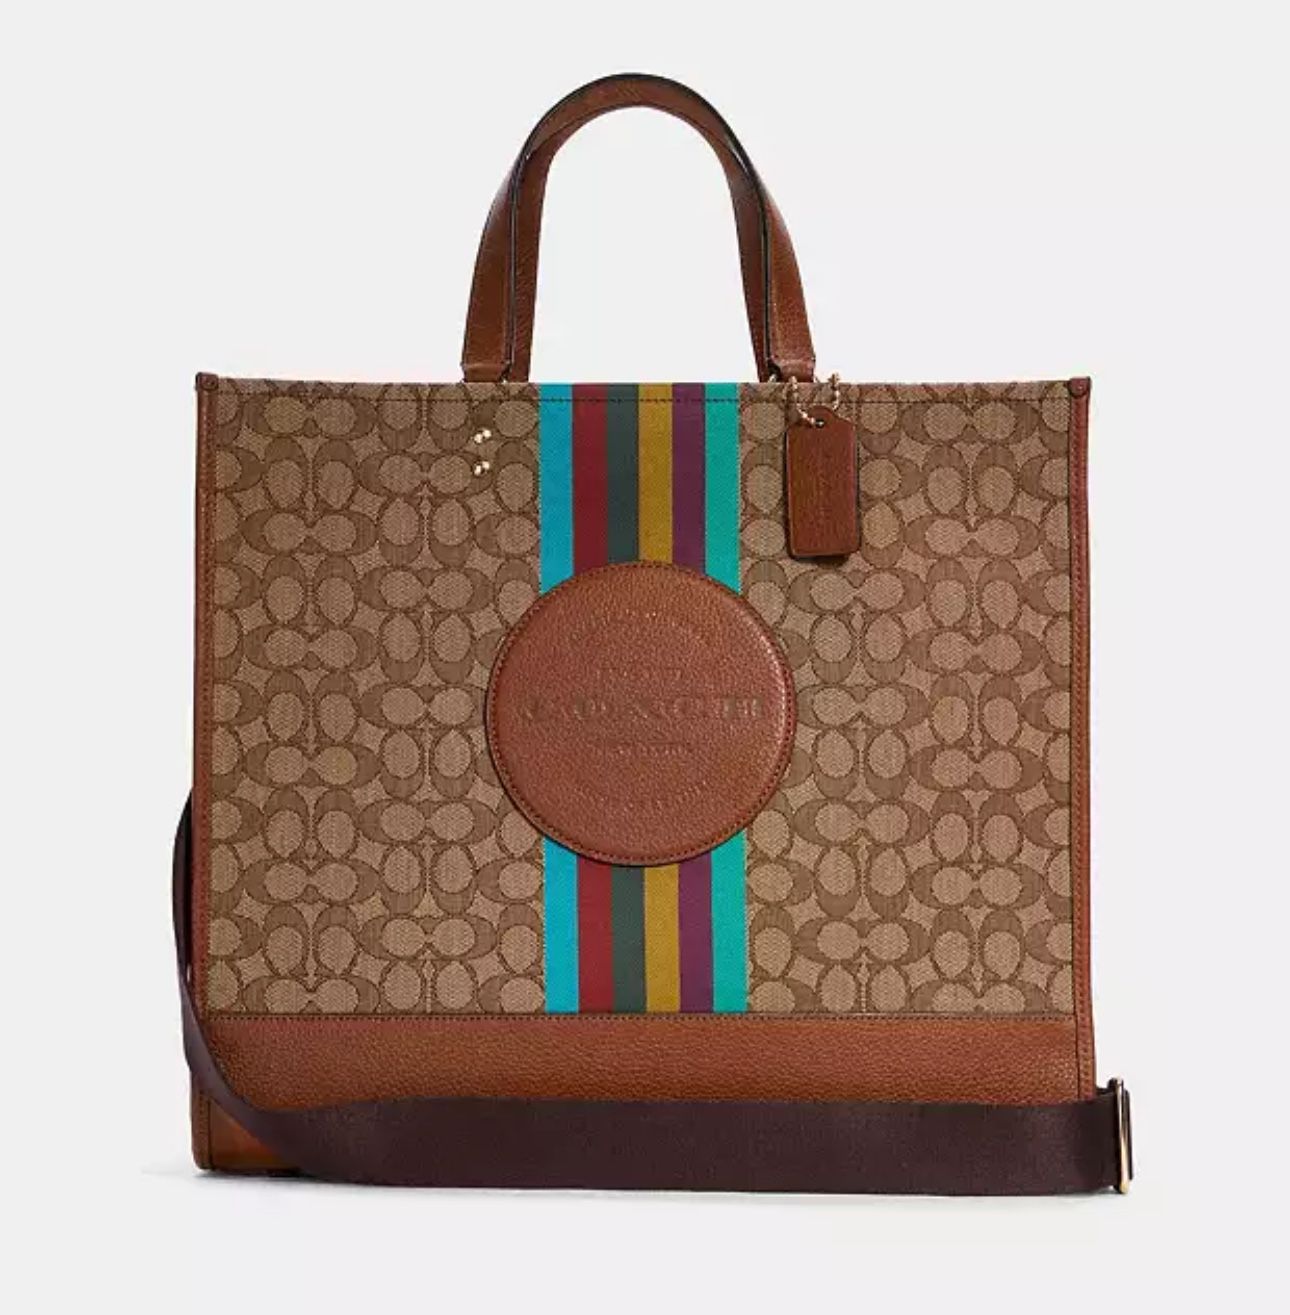 Coach Tote Bag - Limited Edition